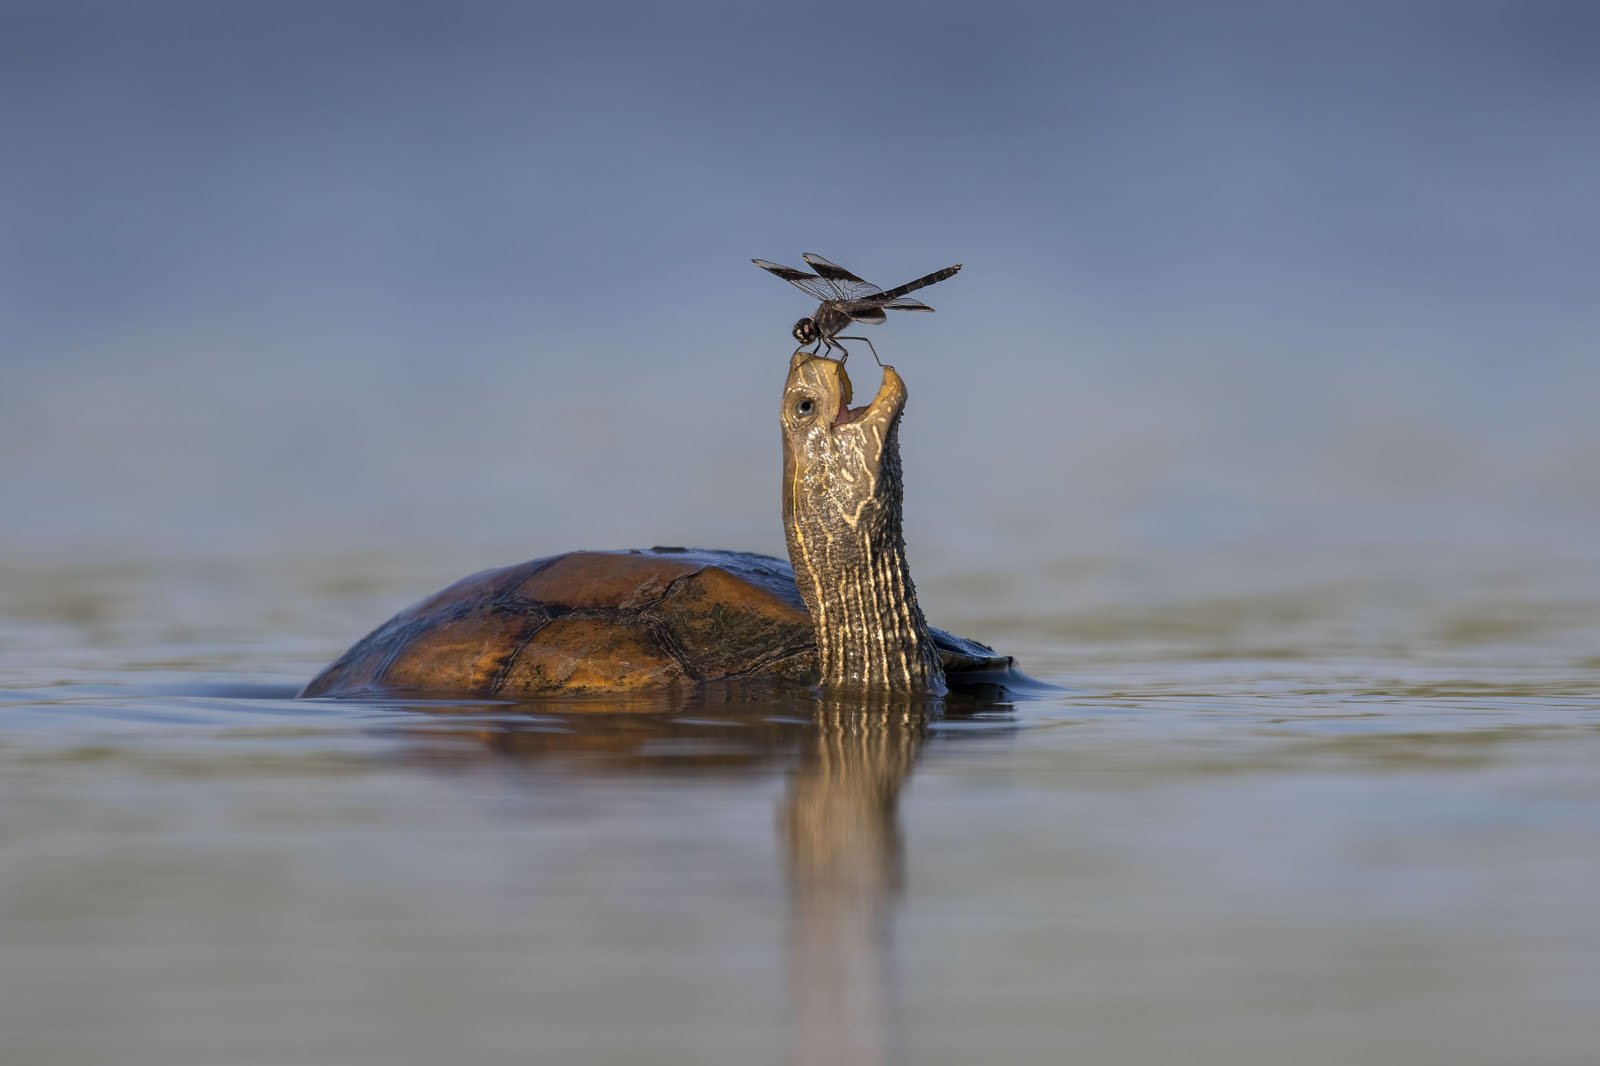 Wildlife Photographer of the Year People's Choice Award winners announced by the Natural History Museum, London